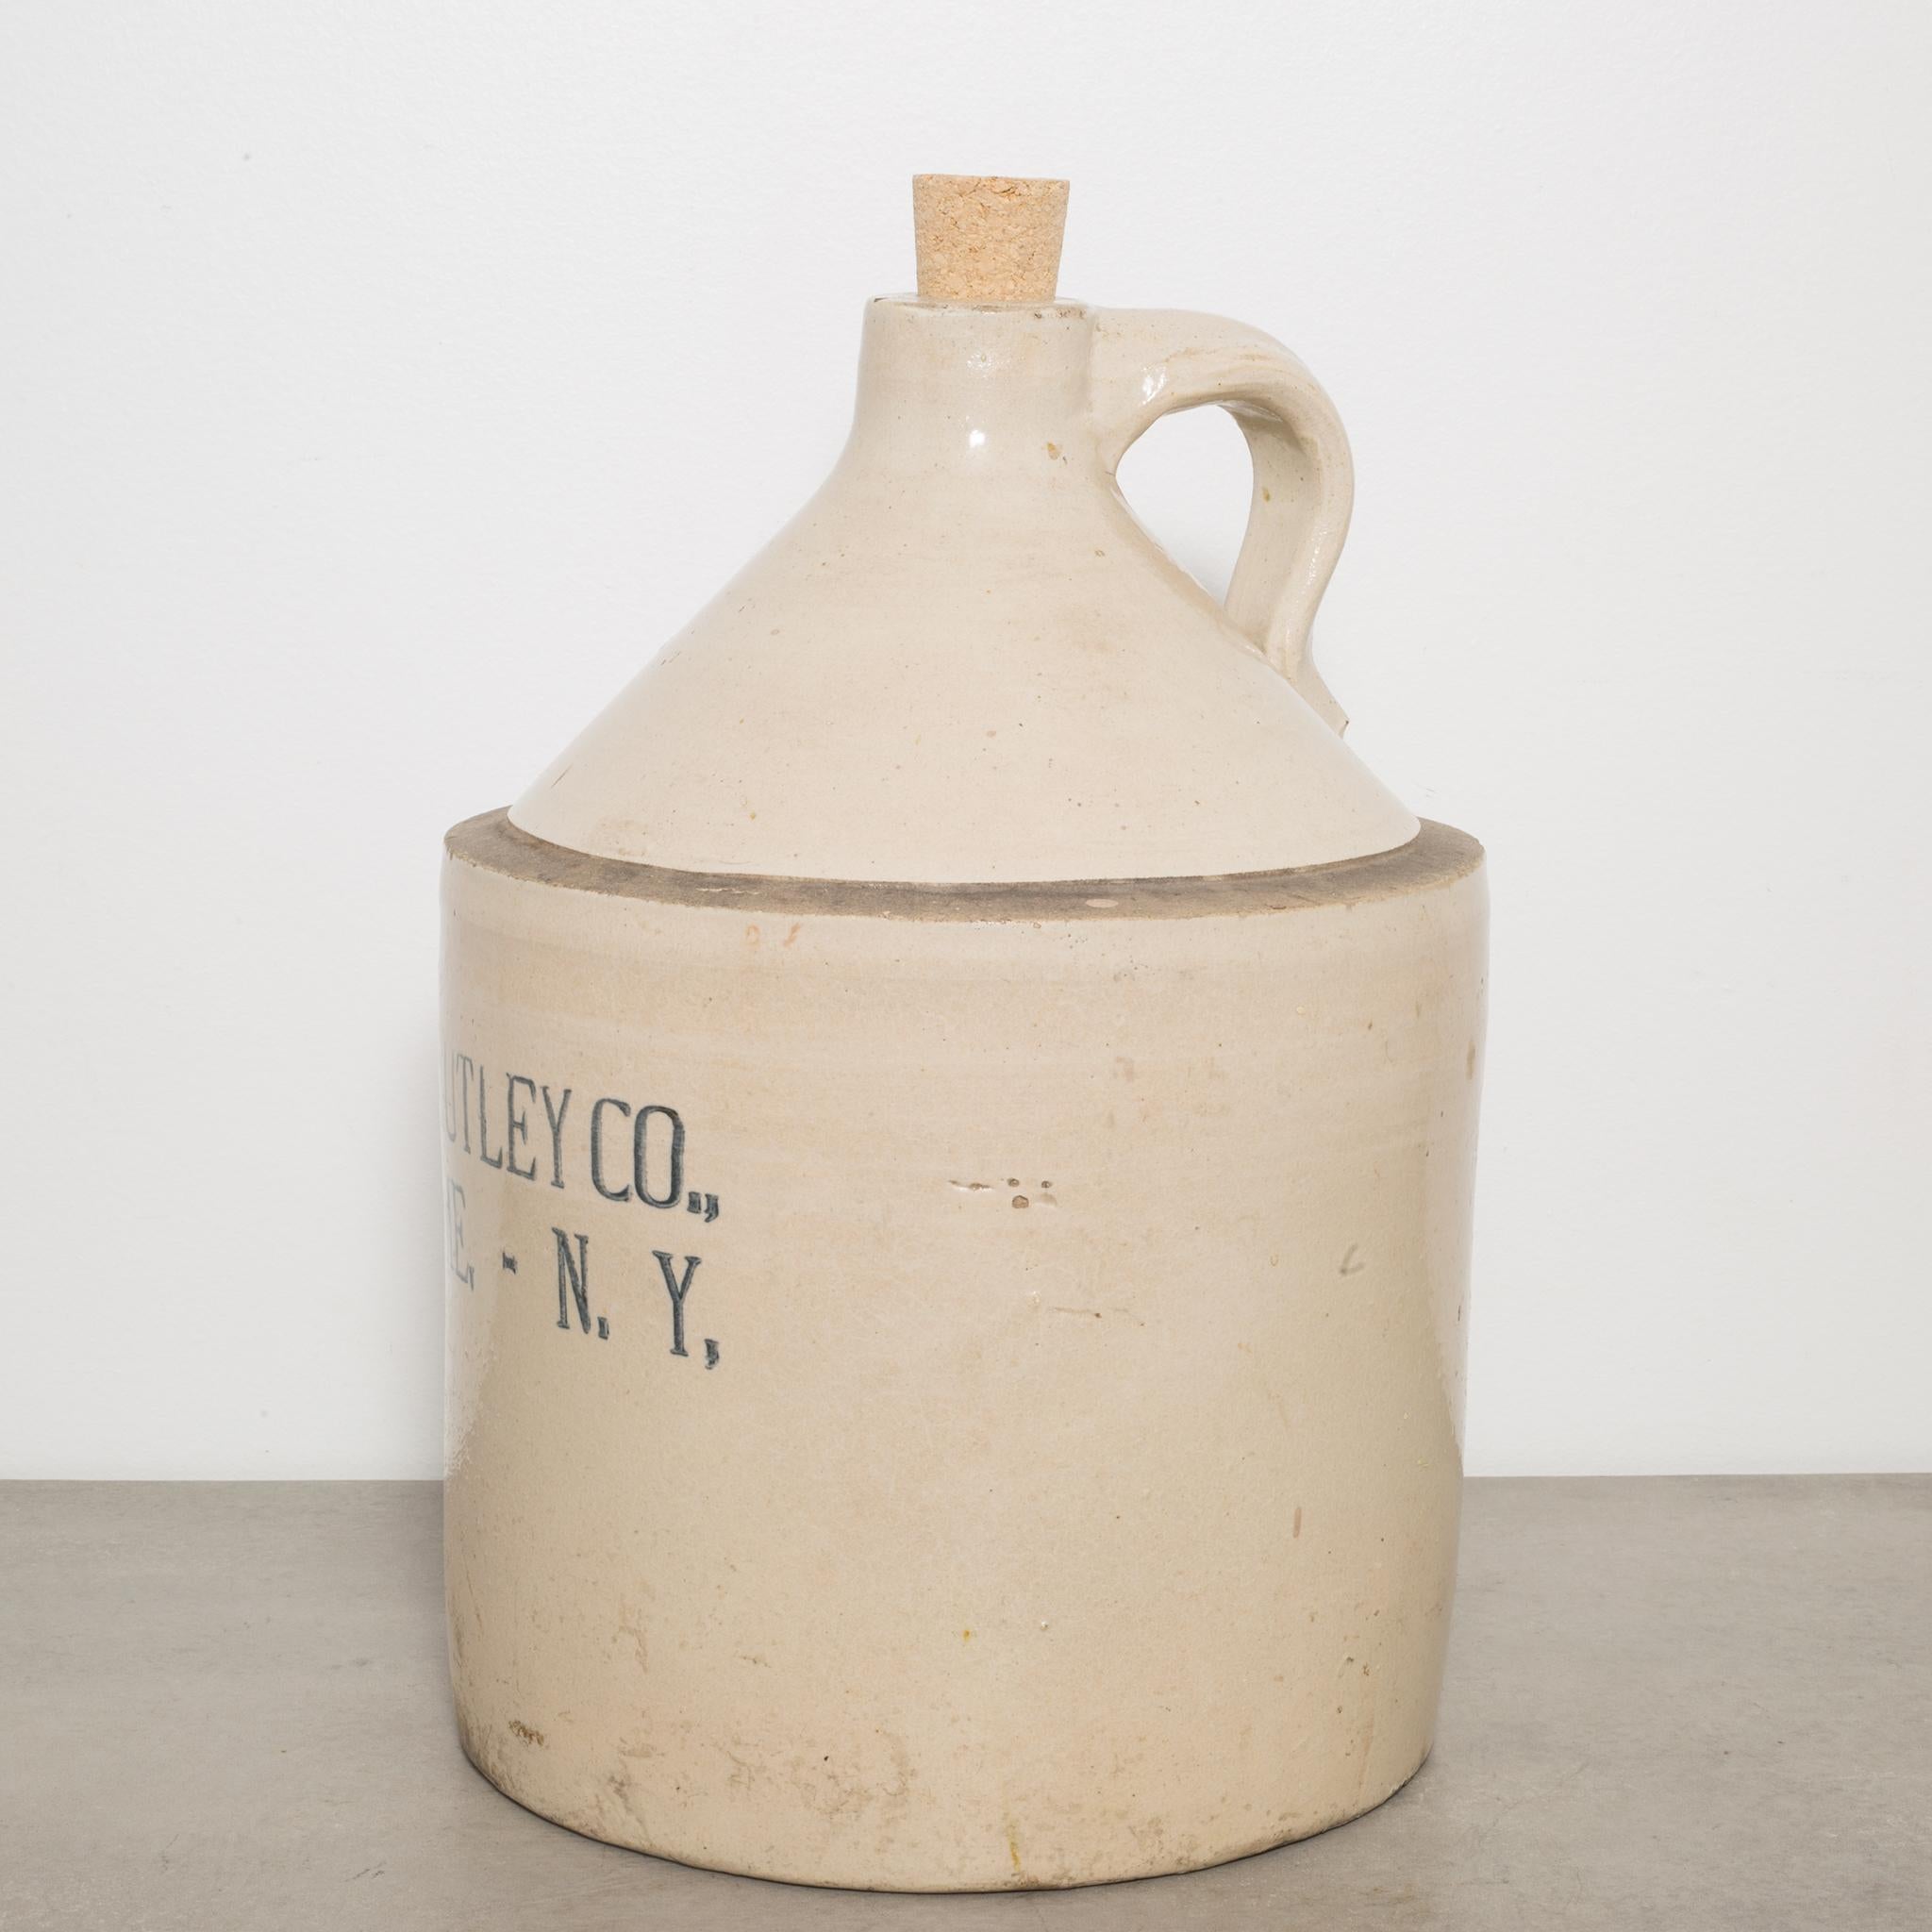 About

This is an original salt glazed stoneware jug with handle by R.L. Utley Company. This piece has retained its original finish with minor wear.

Creator R.l.Utley Co., Rome, NY.
Date Of Manufacture, circa1900.
Materials and techniques